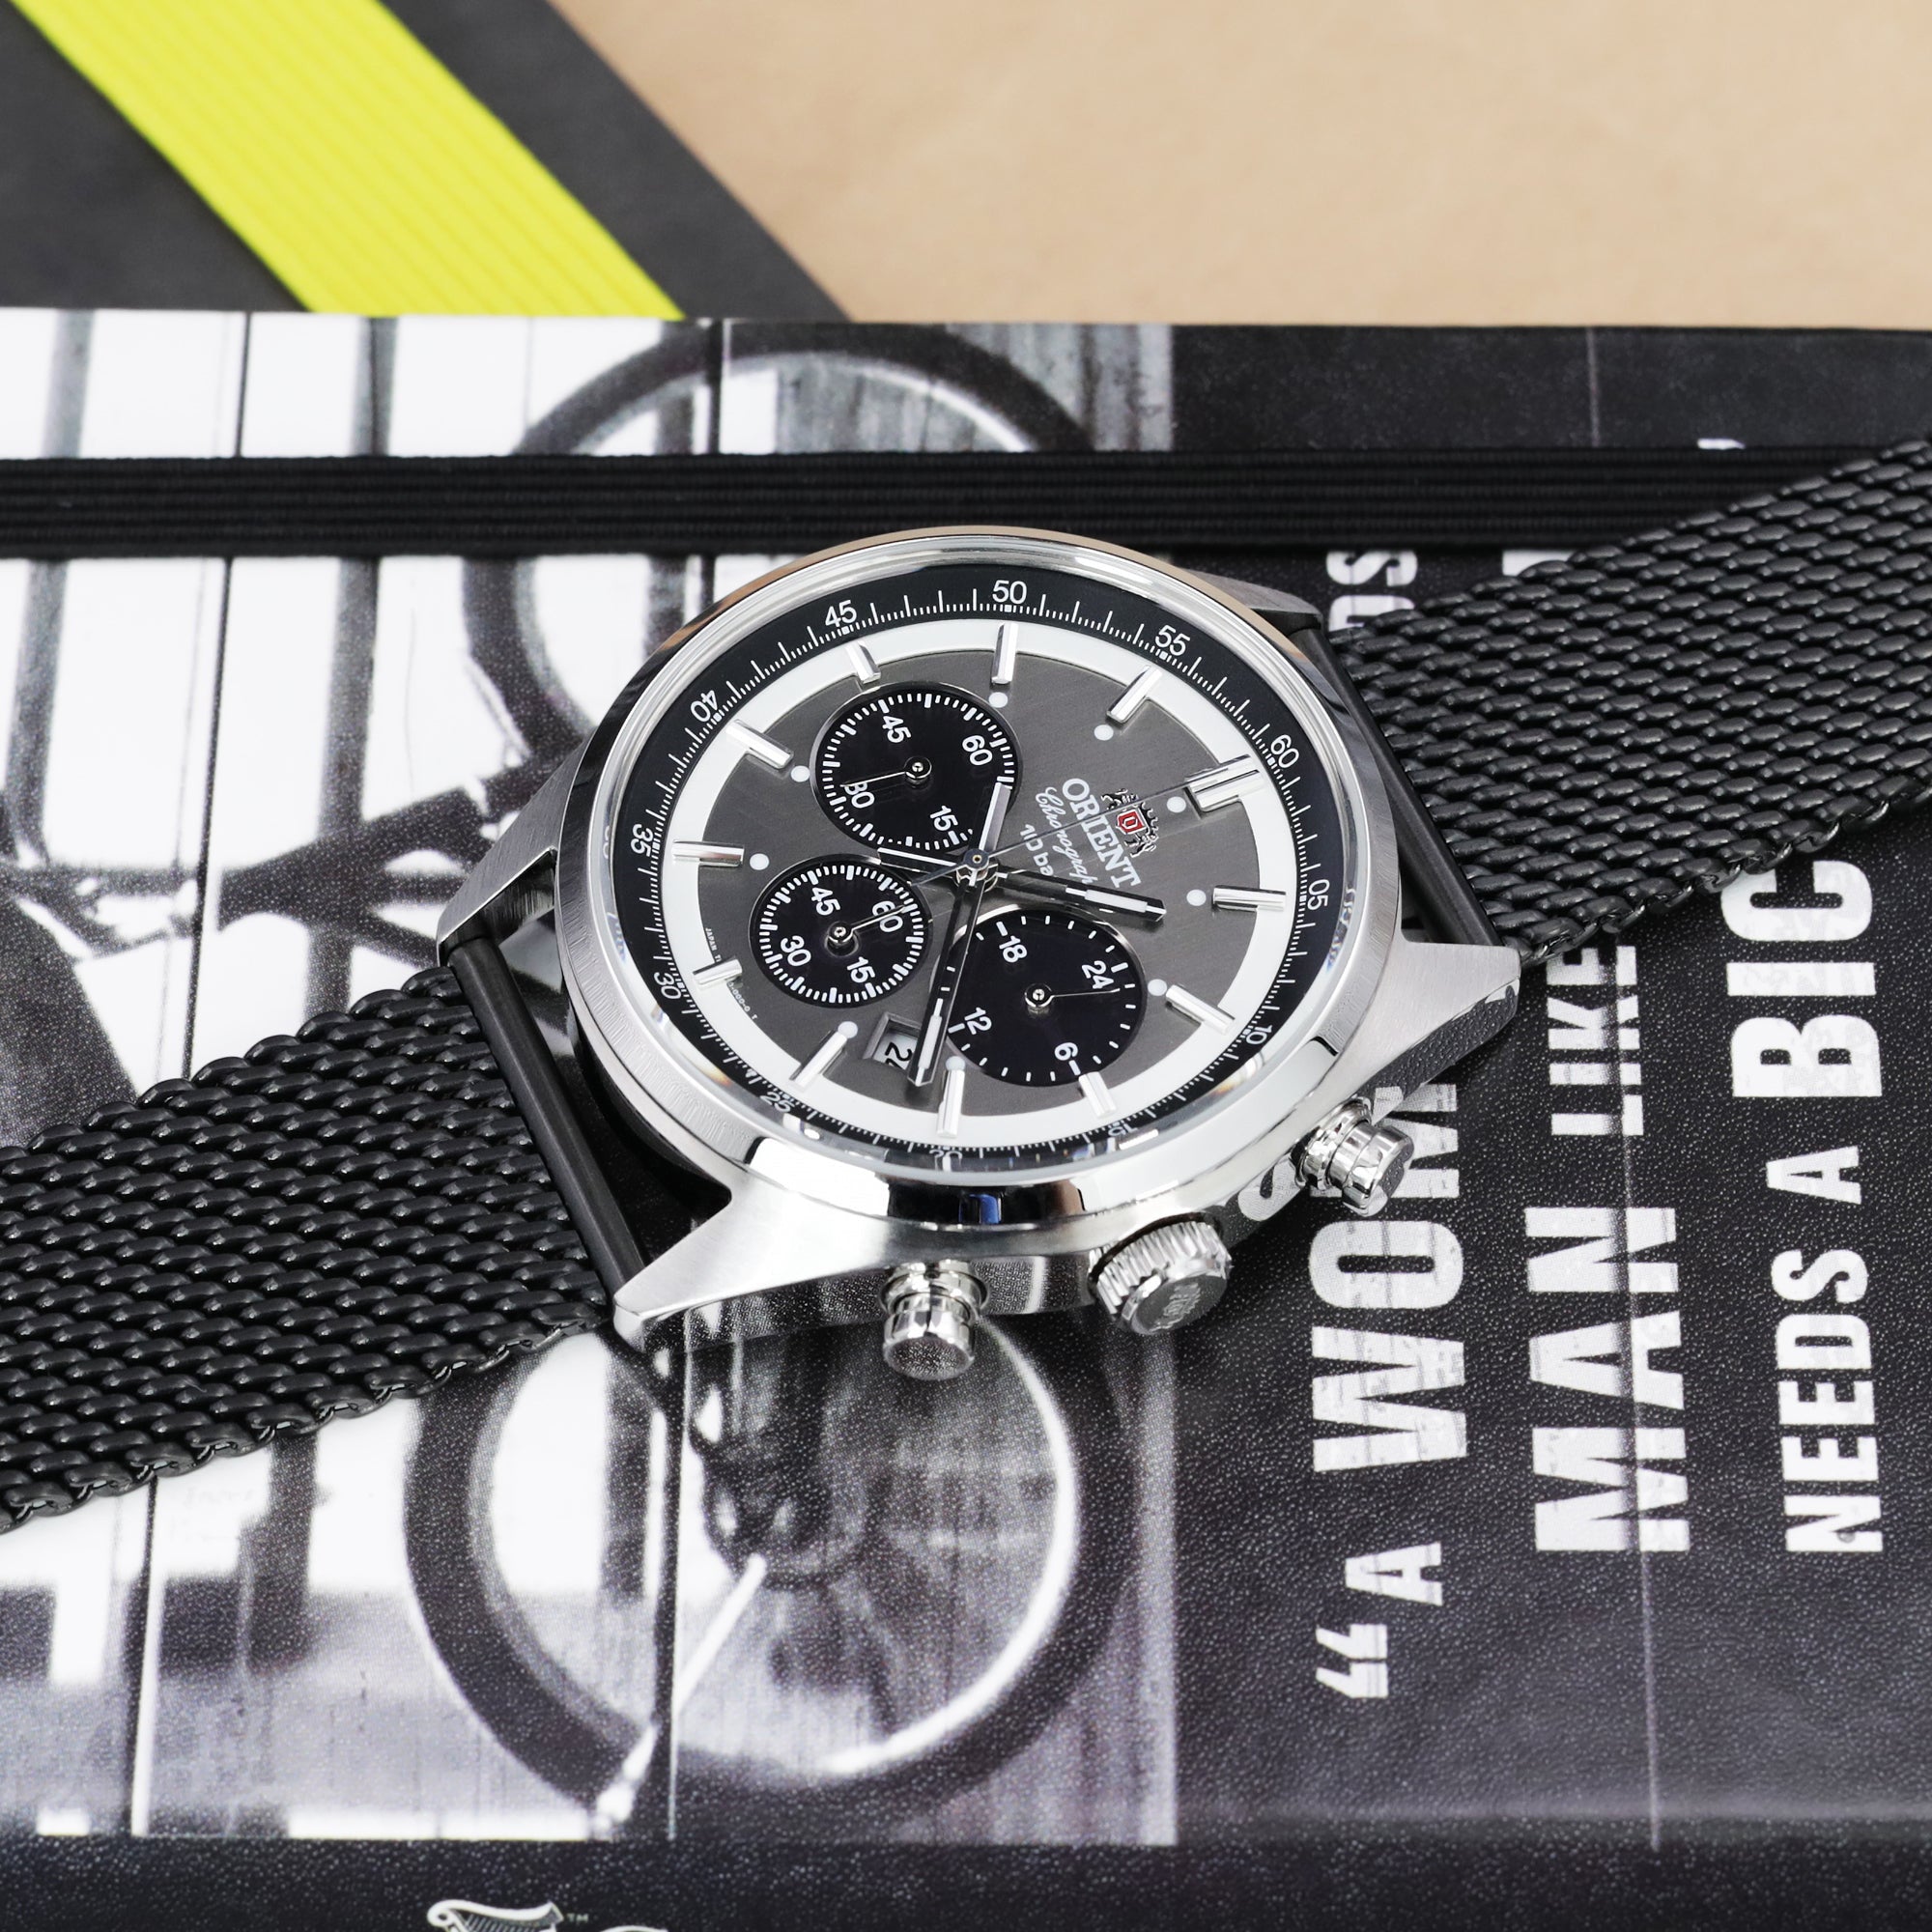 All straight Matte Black Mesh watch band by Strapcode